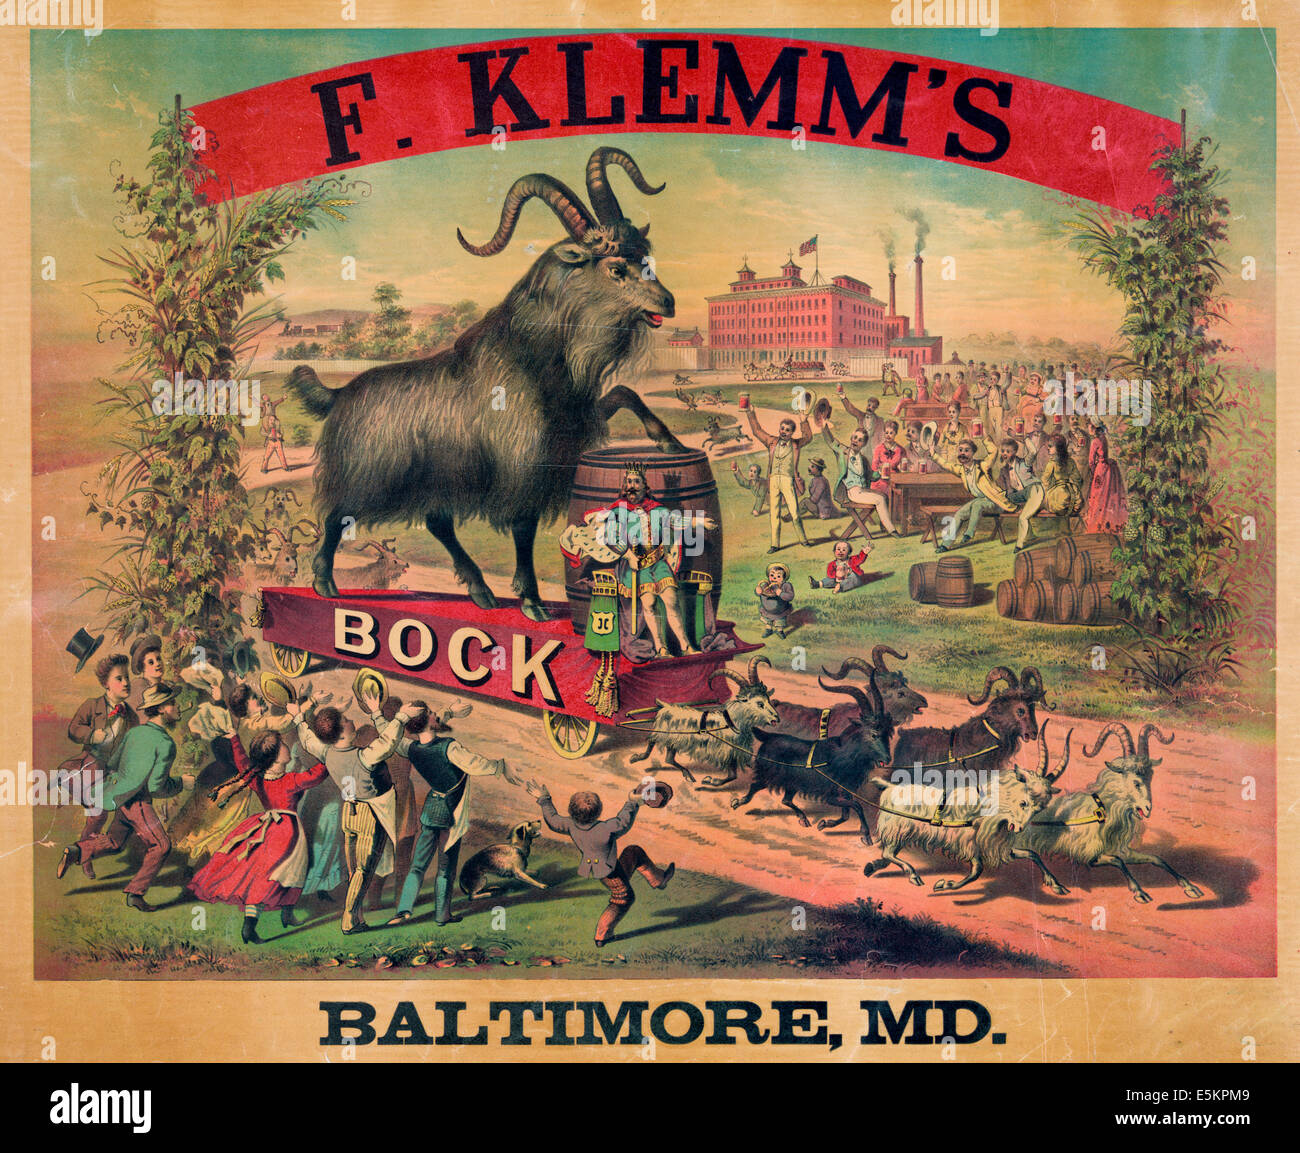 F. Klemm's Bock Beer - Baltimore, MD - Poster circa 1880 Stock Photo